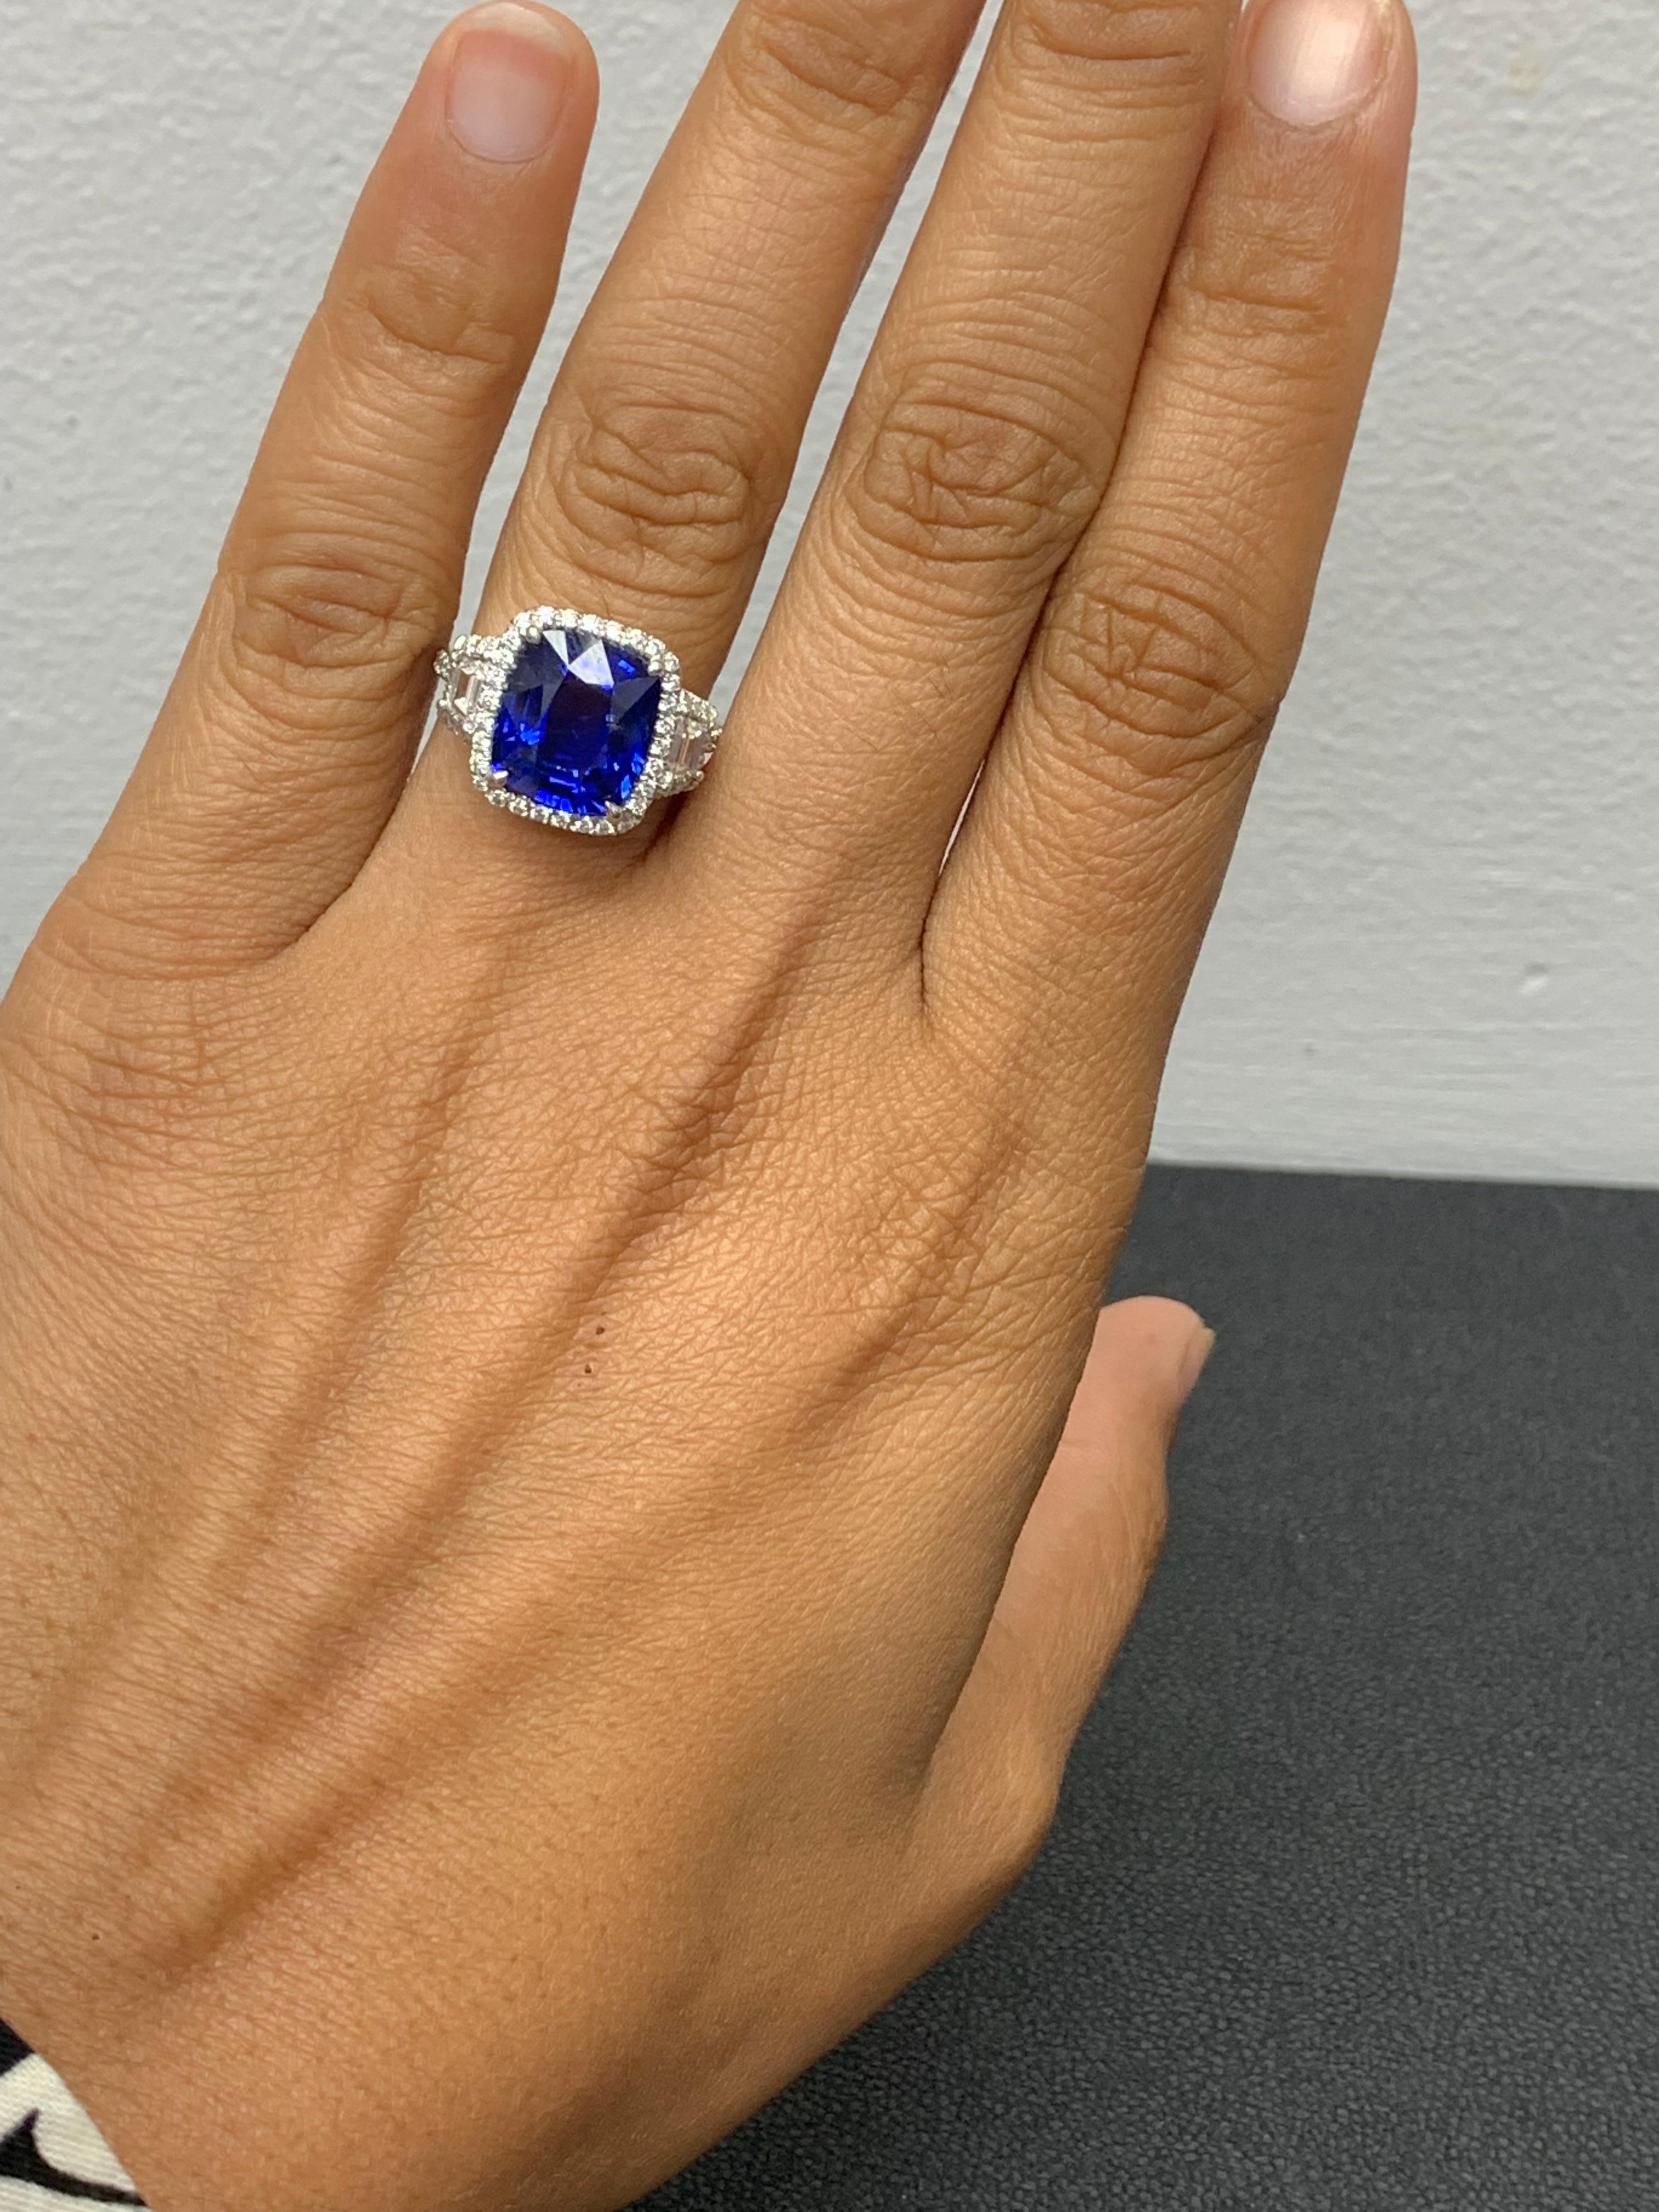 Certified 5.76 Carat Cushion Cut Sapphire Diamond 3 Stone Ring in Platinum For Sale 2